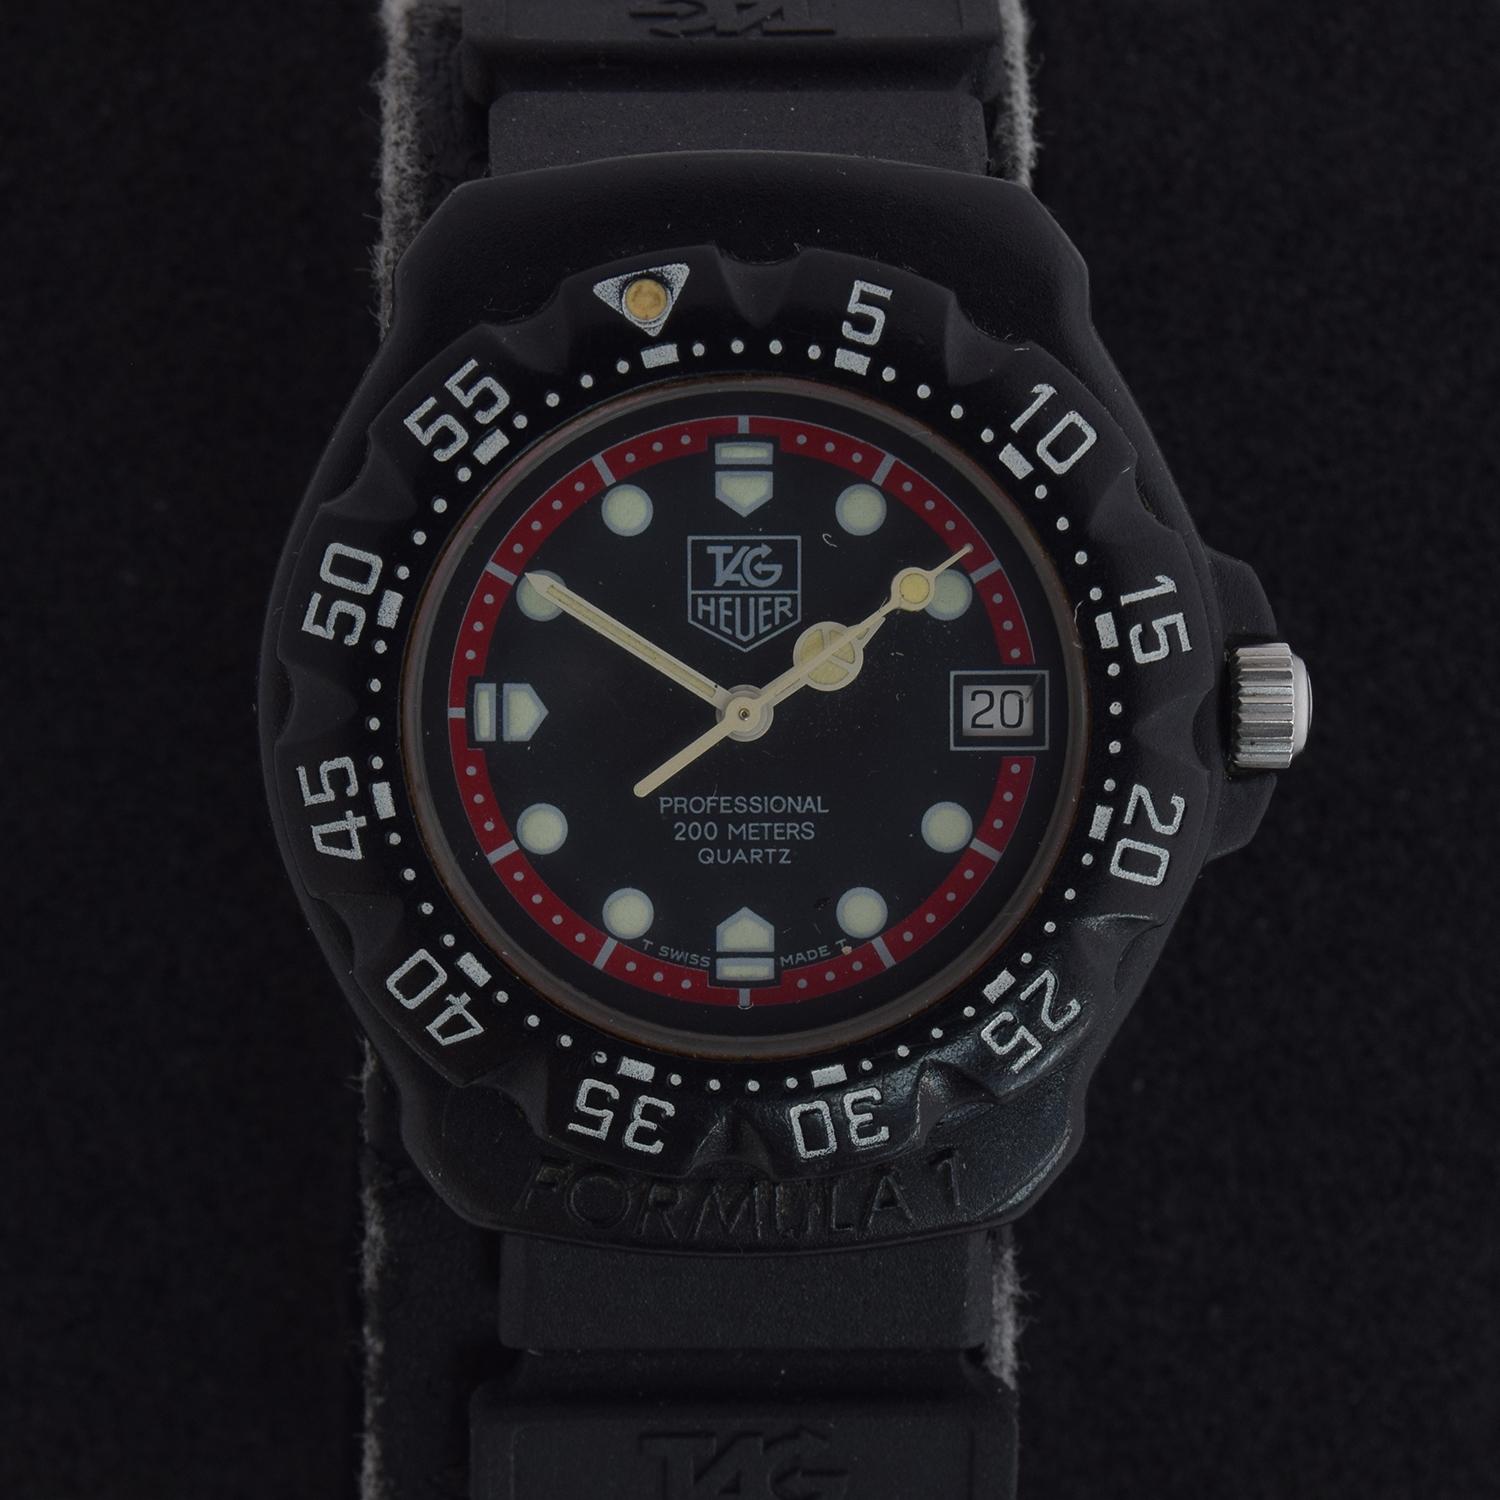 A TAG HEUER FORMULA 1 GENTLEMAN'S QUARTZ WATCH black dial with red outer ring, luminous dot hour